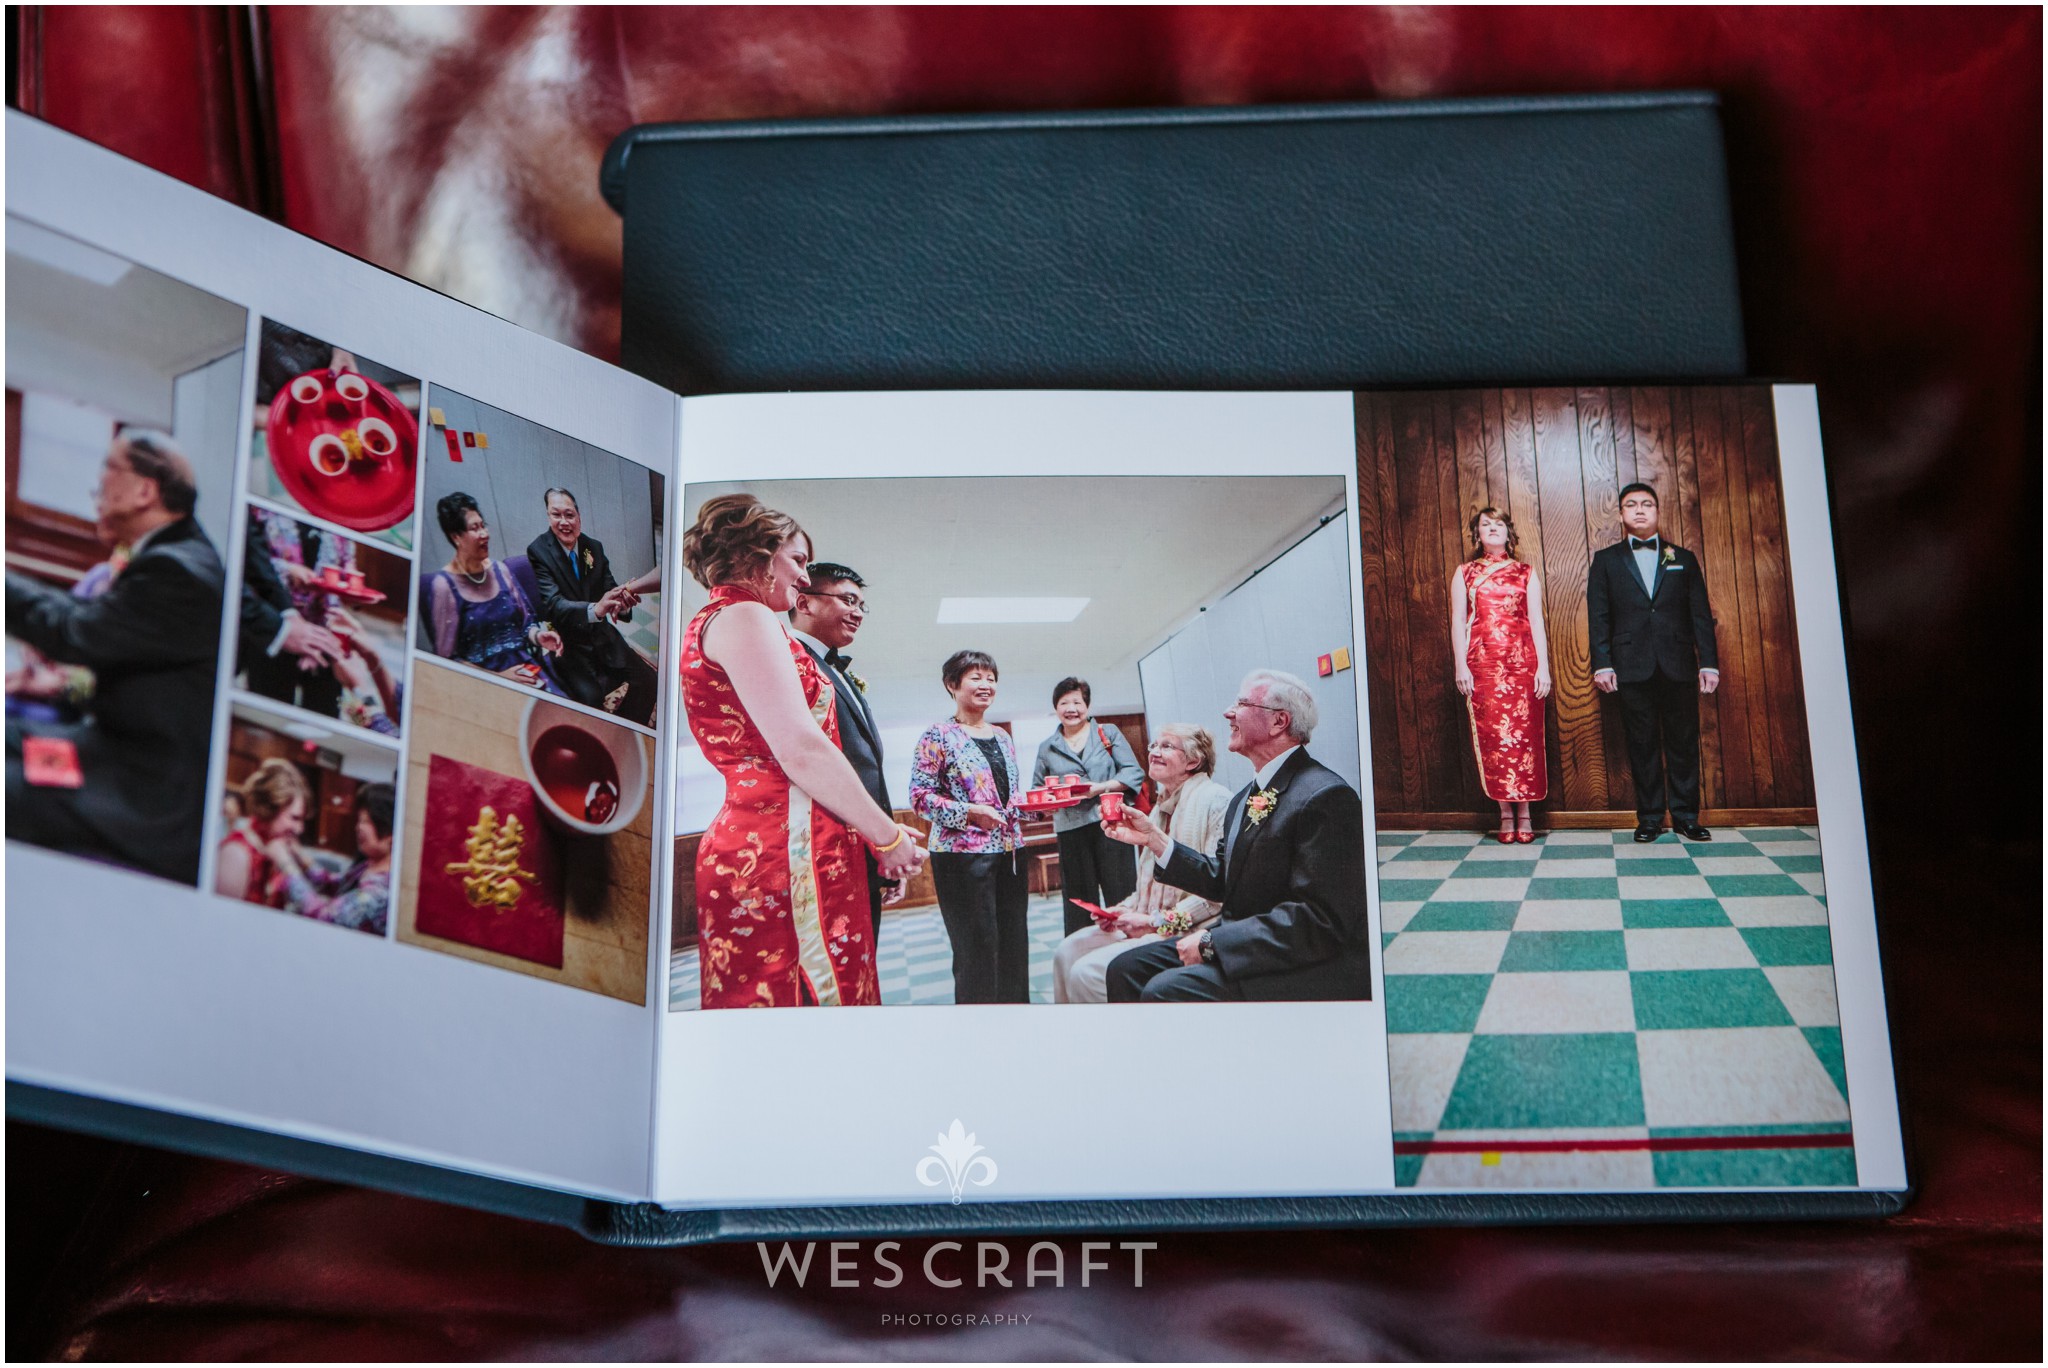 This Chicago couple had a traditional Chinese Tea ceremony in the church basement before the wedding ceremony. We made a serious Chinese wedding portrait as well! I love seeing this in print.